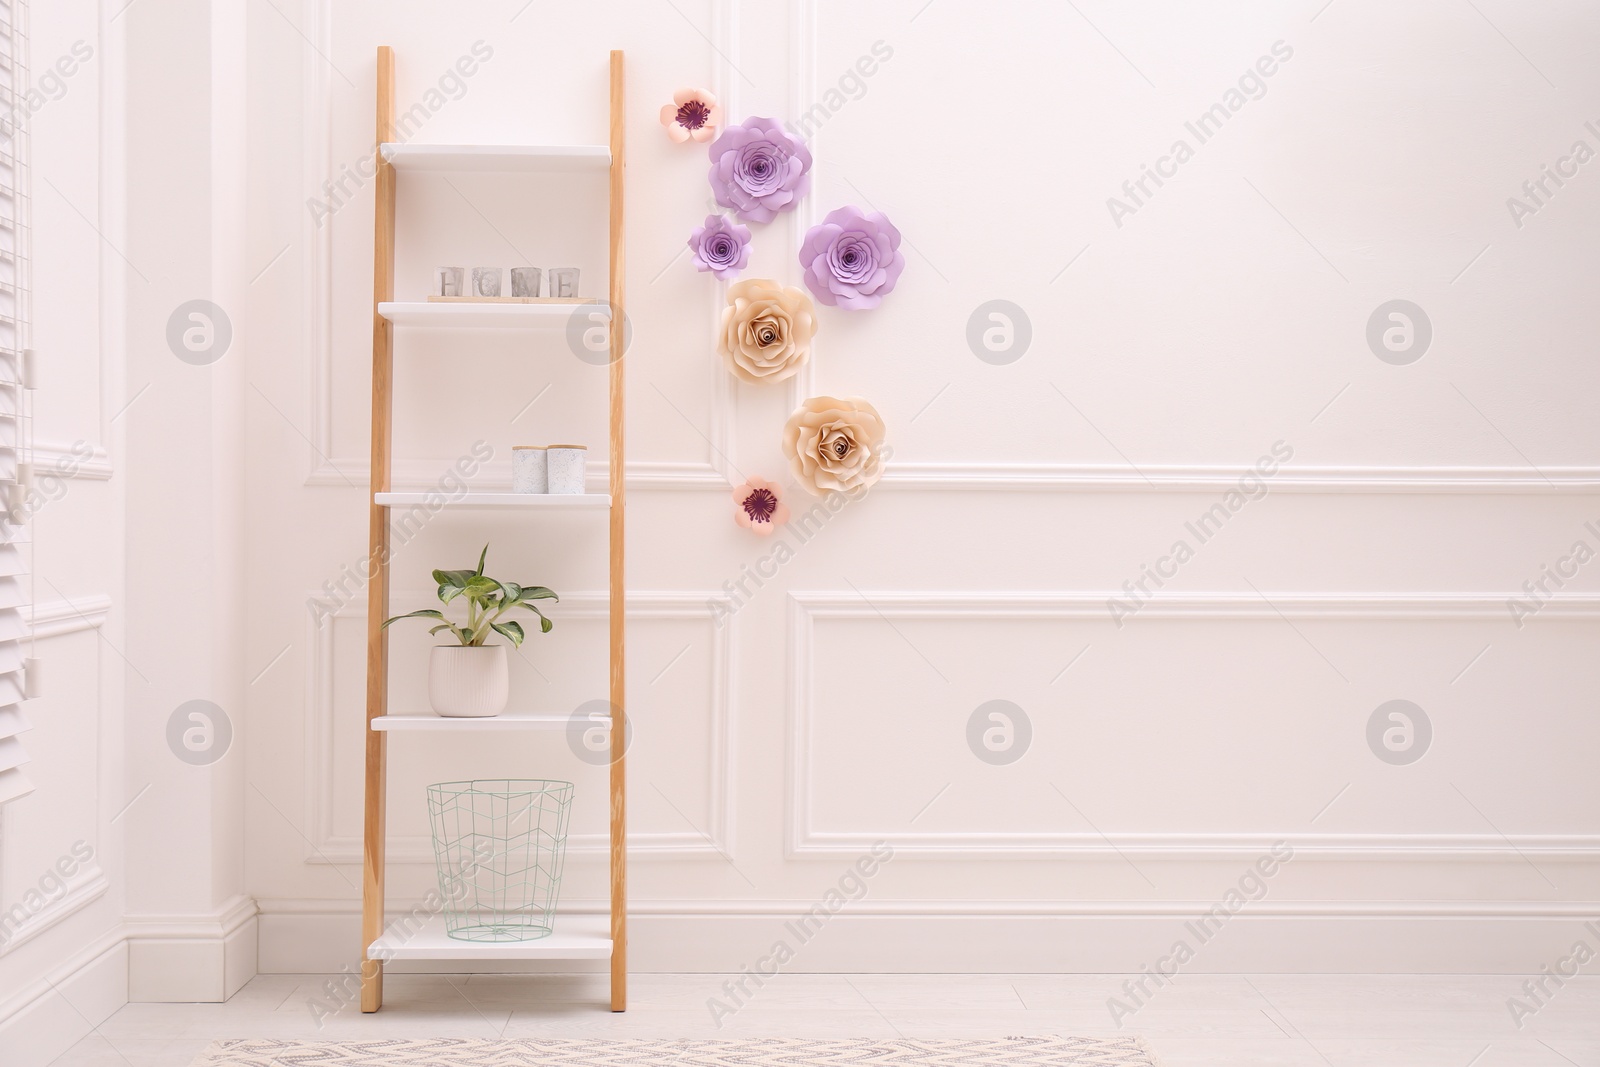 Photo of Shelving unit near wall with floral decor in room, space for text. Interior design